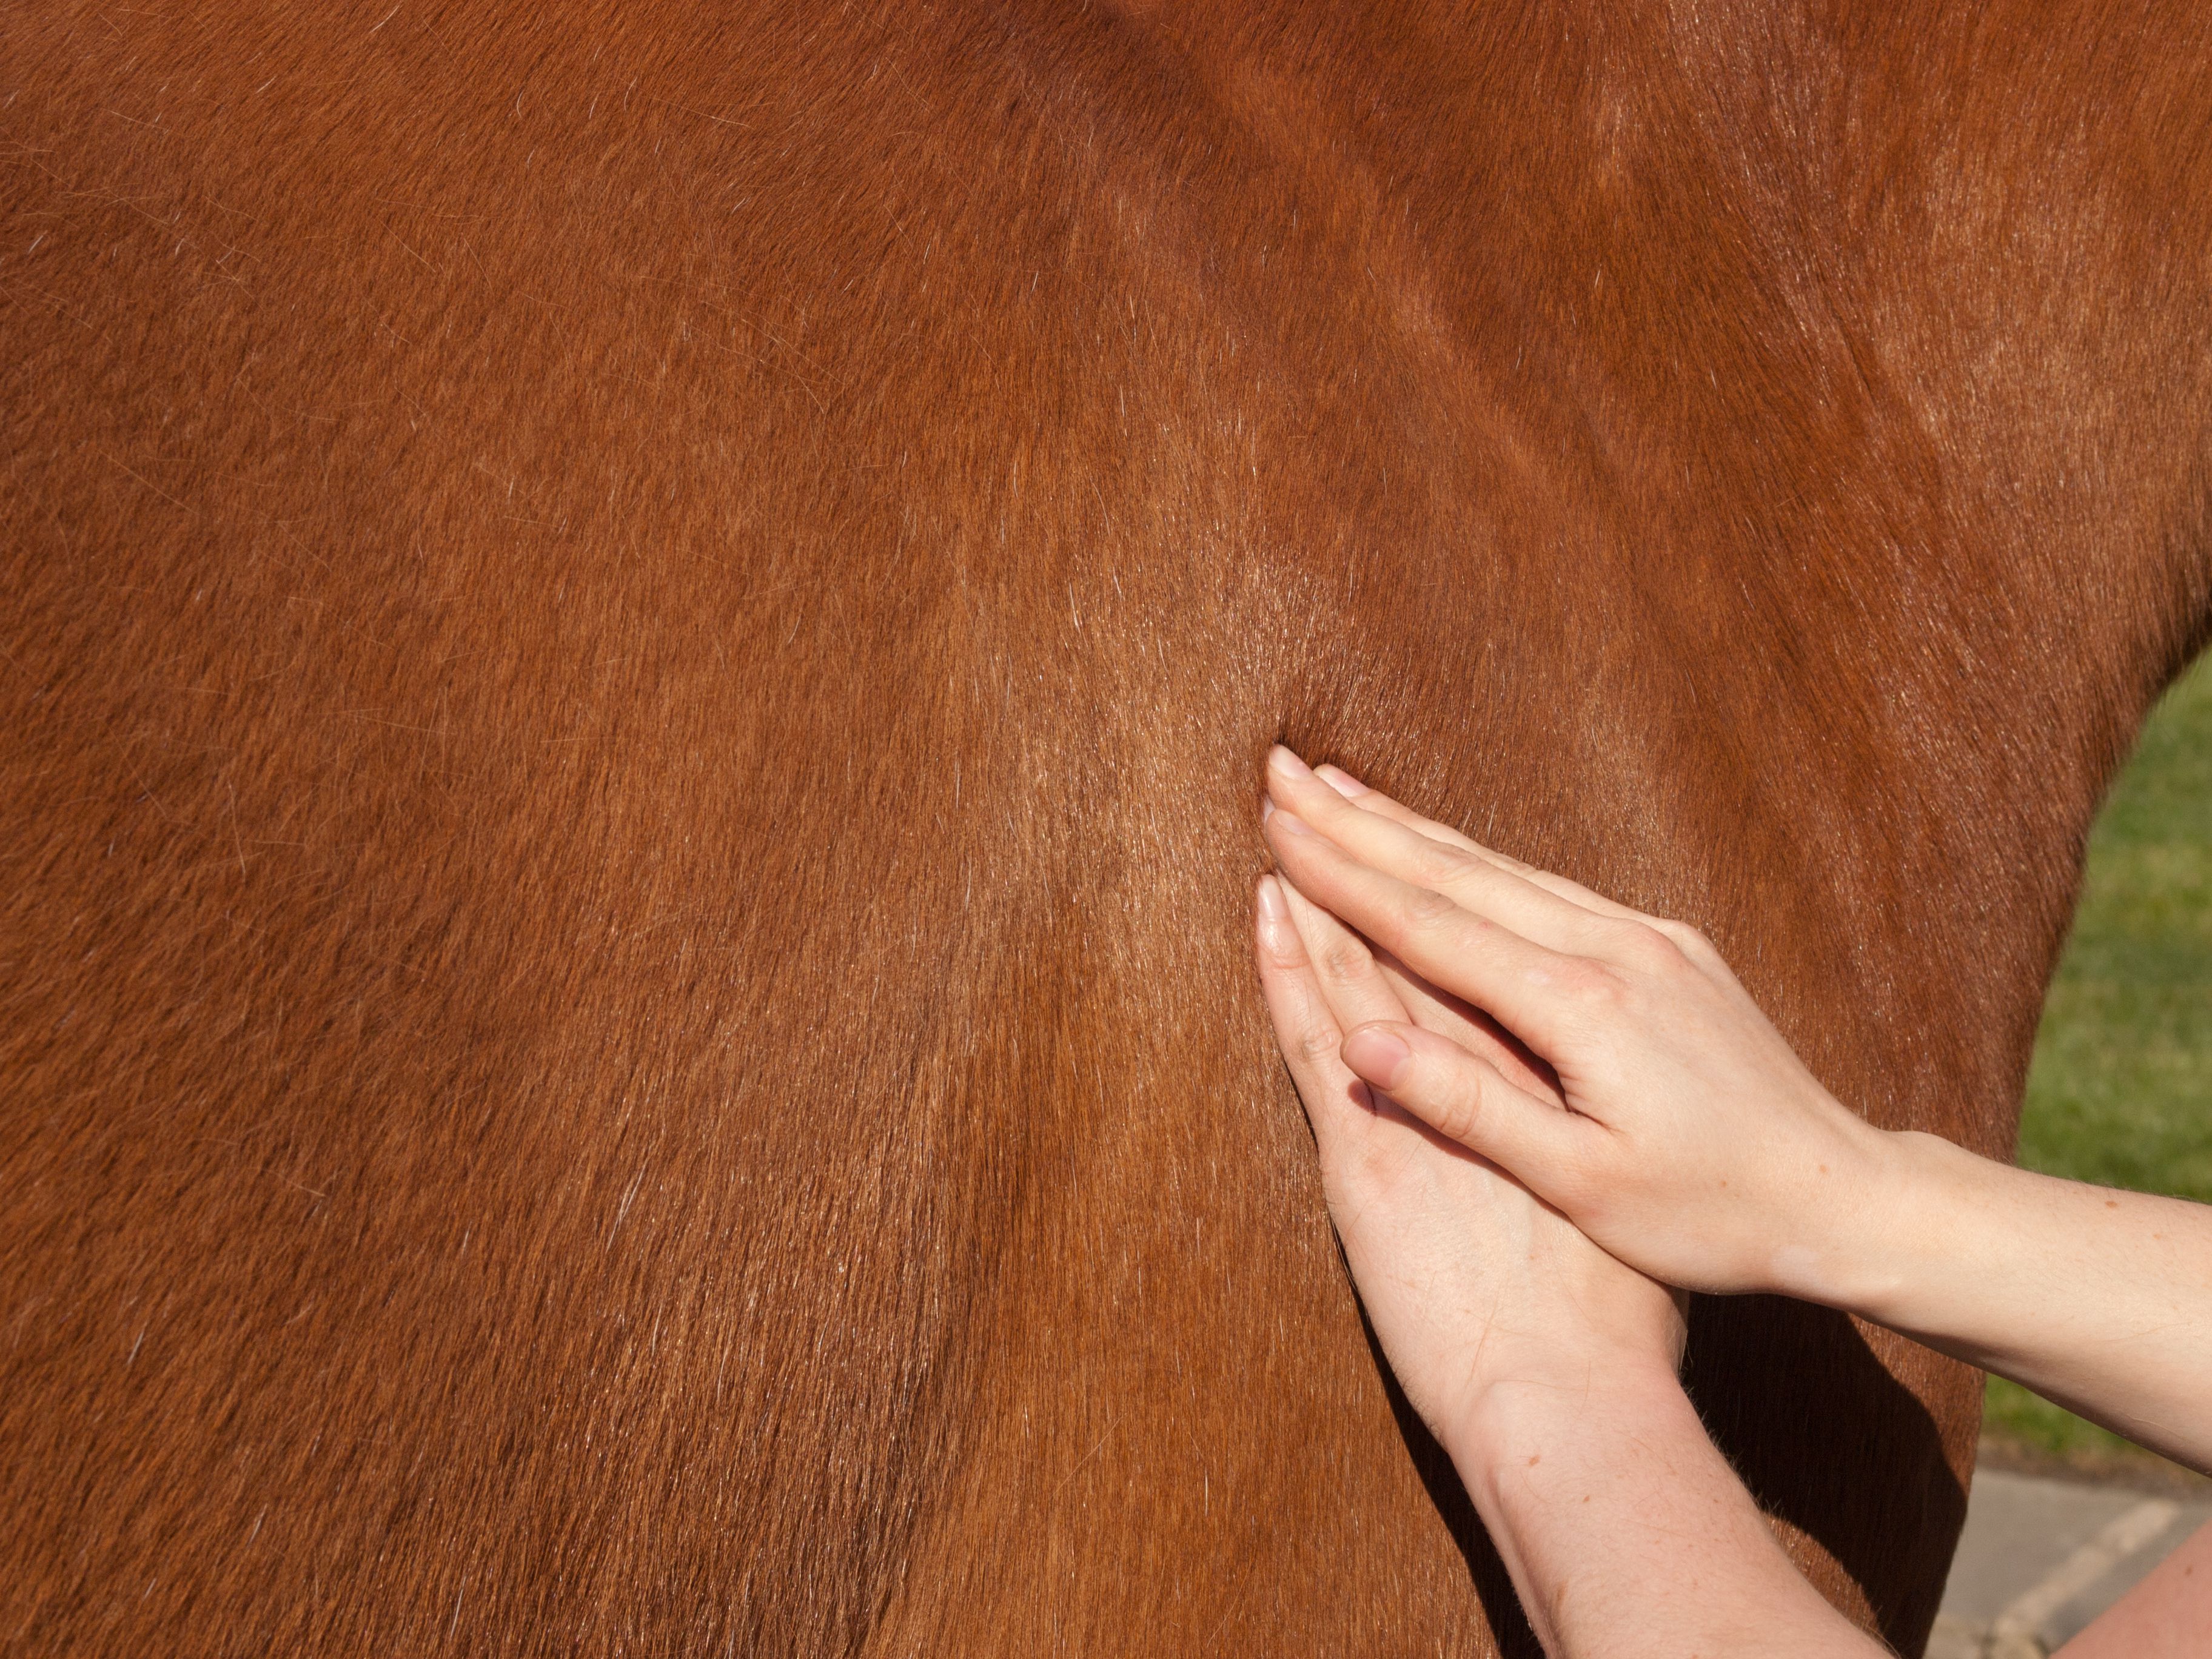 Physiotherapy for a horse